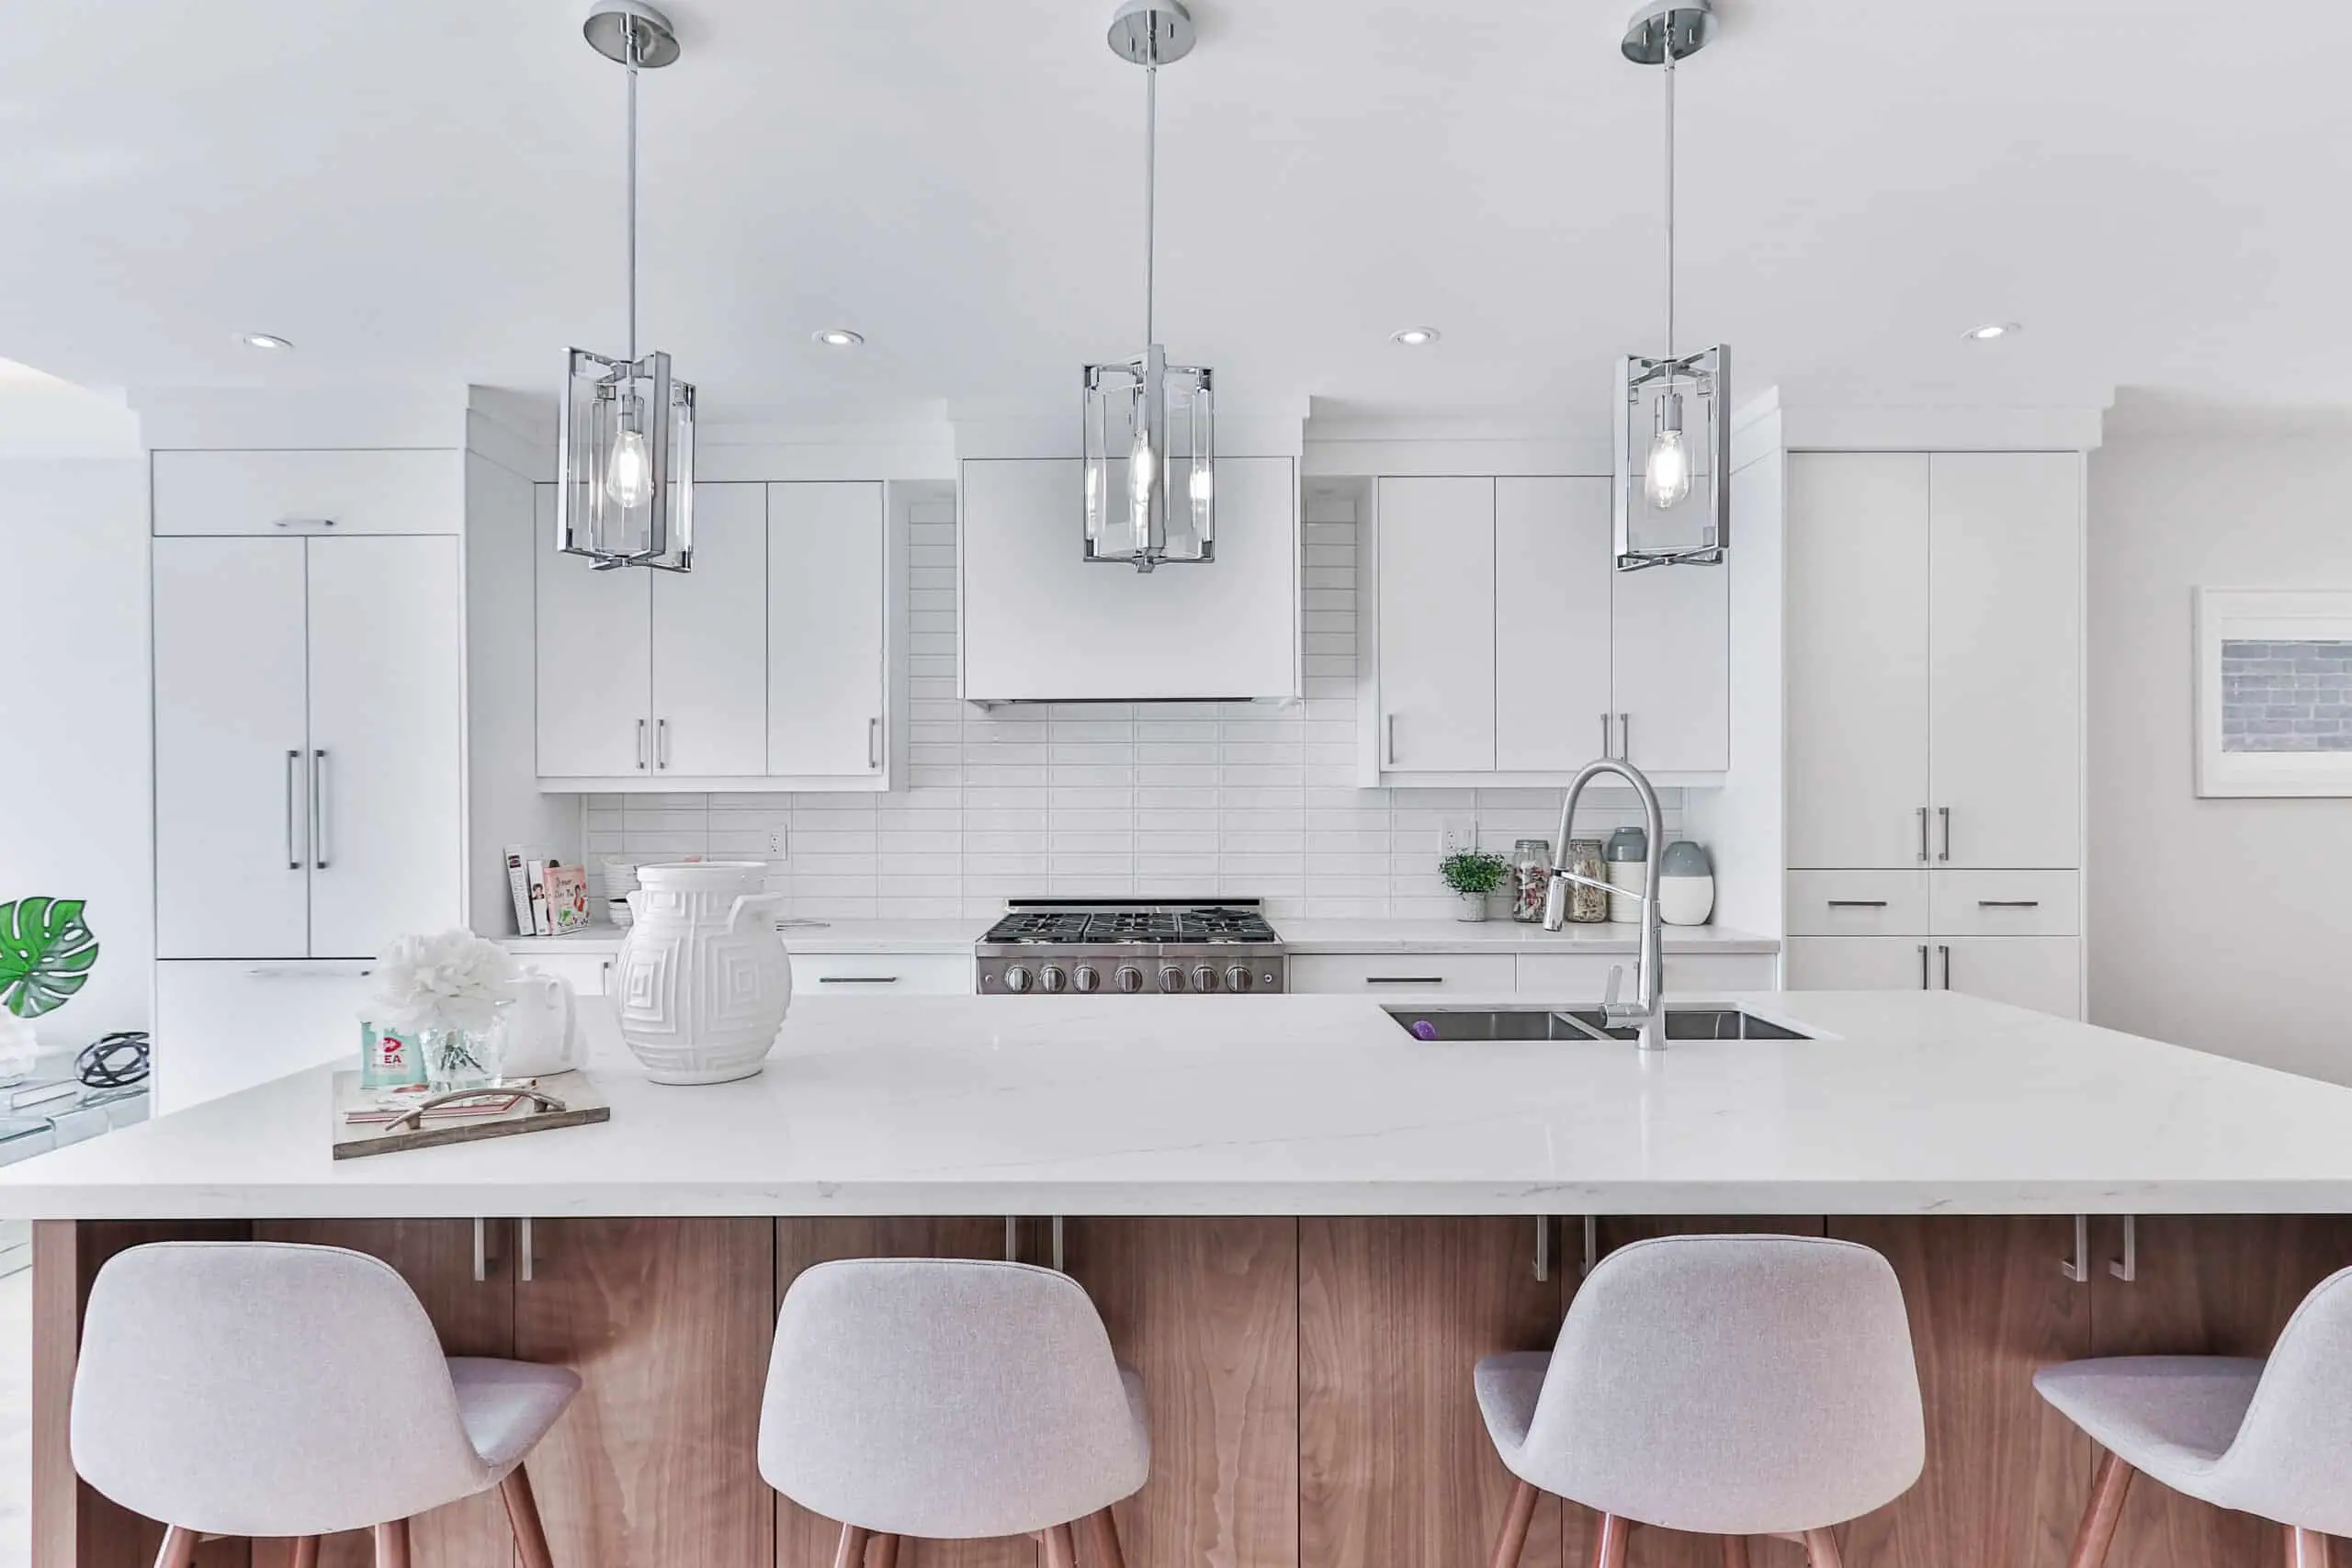 Designing The Ideal Modern Kitchen For Your Home